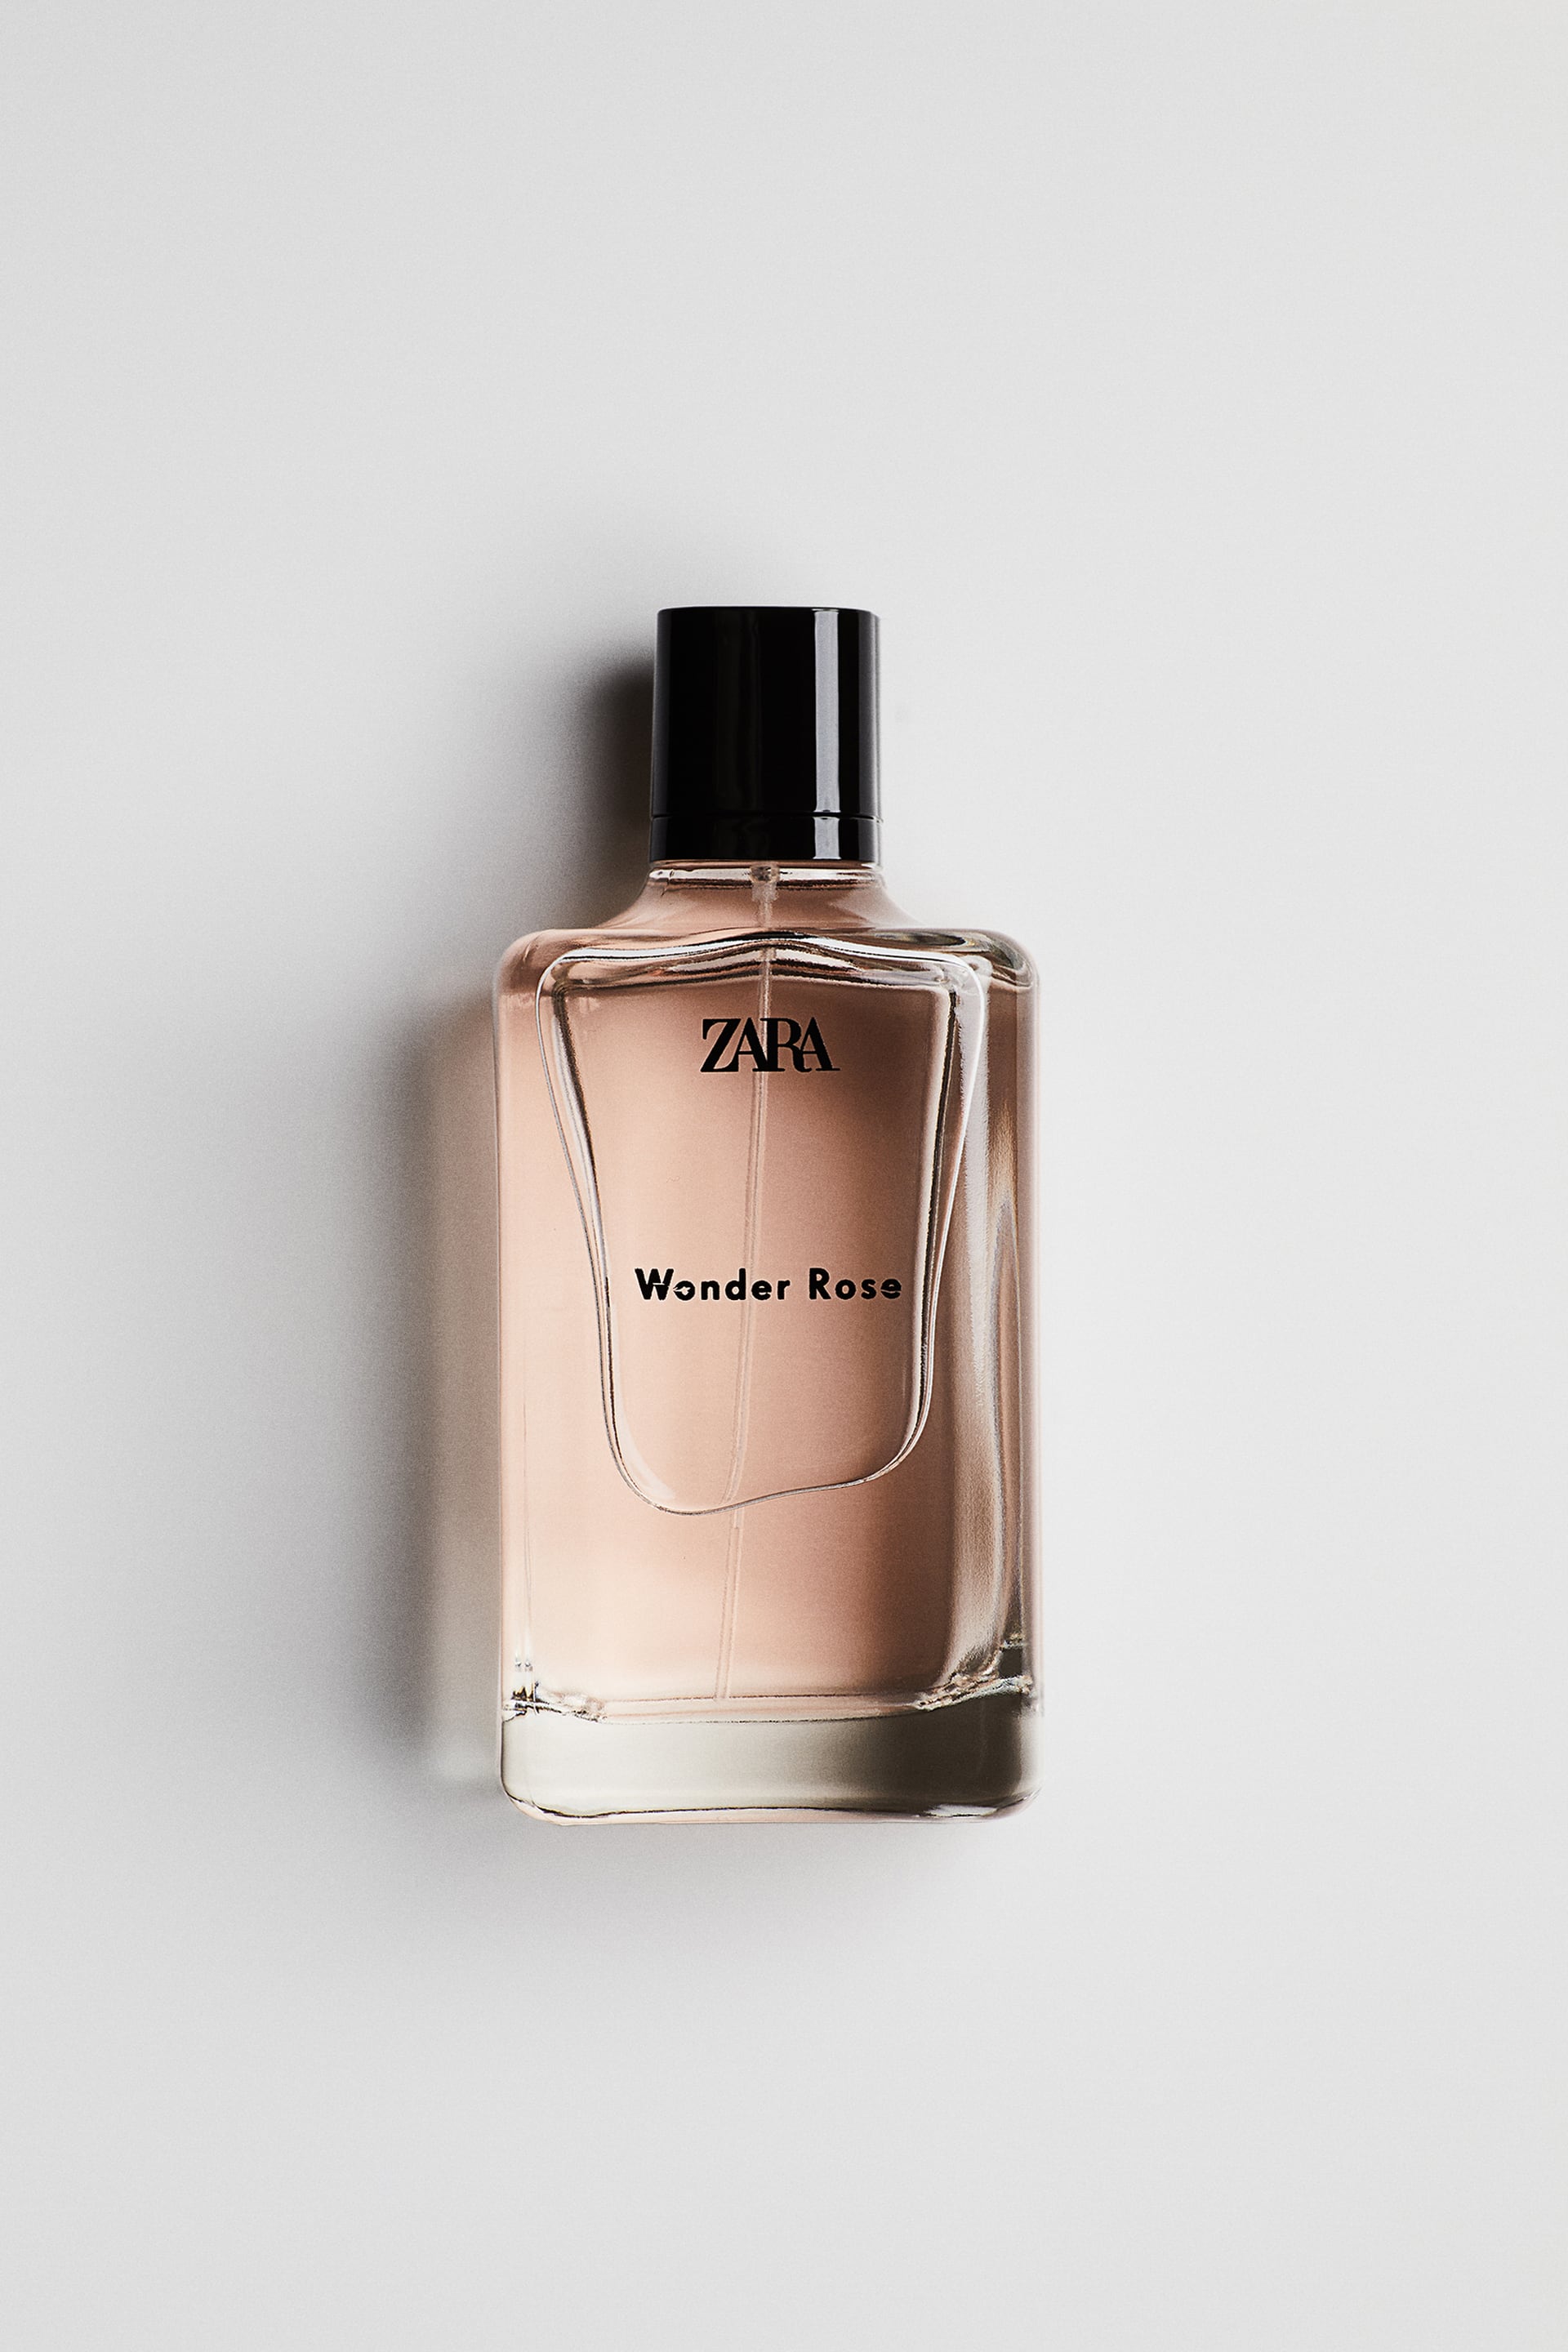 The 7 Best Zara Perfumes For Women To Try In 2023